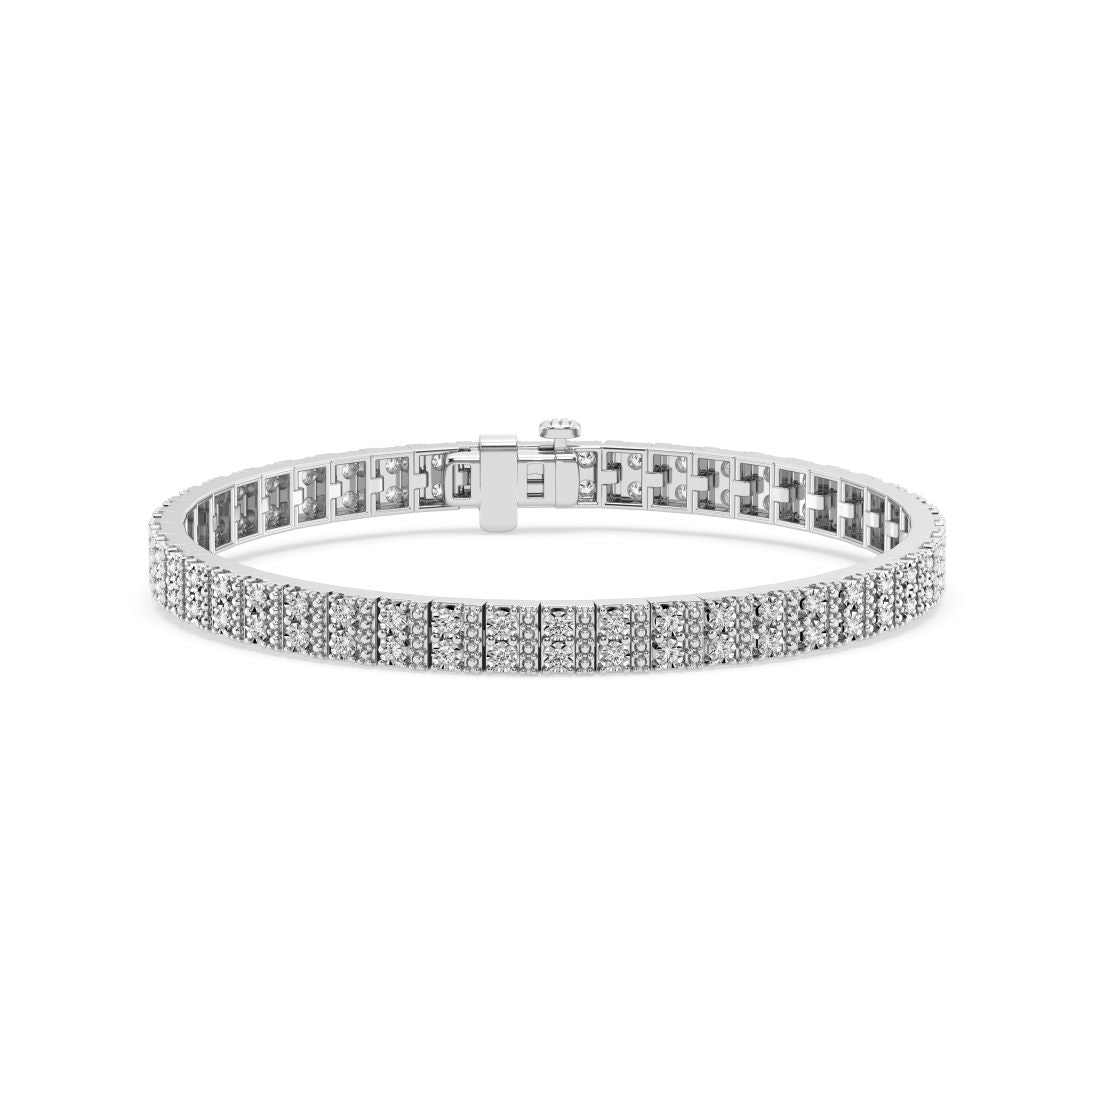 Mirage Multi Row Bracelet with 1.00ct of Laboratory Grown Diamonds in Sterling Silver and Platinum Bracelets Bevilles 